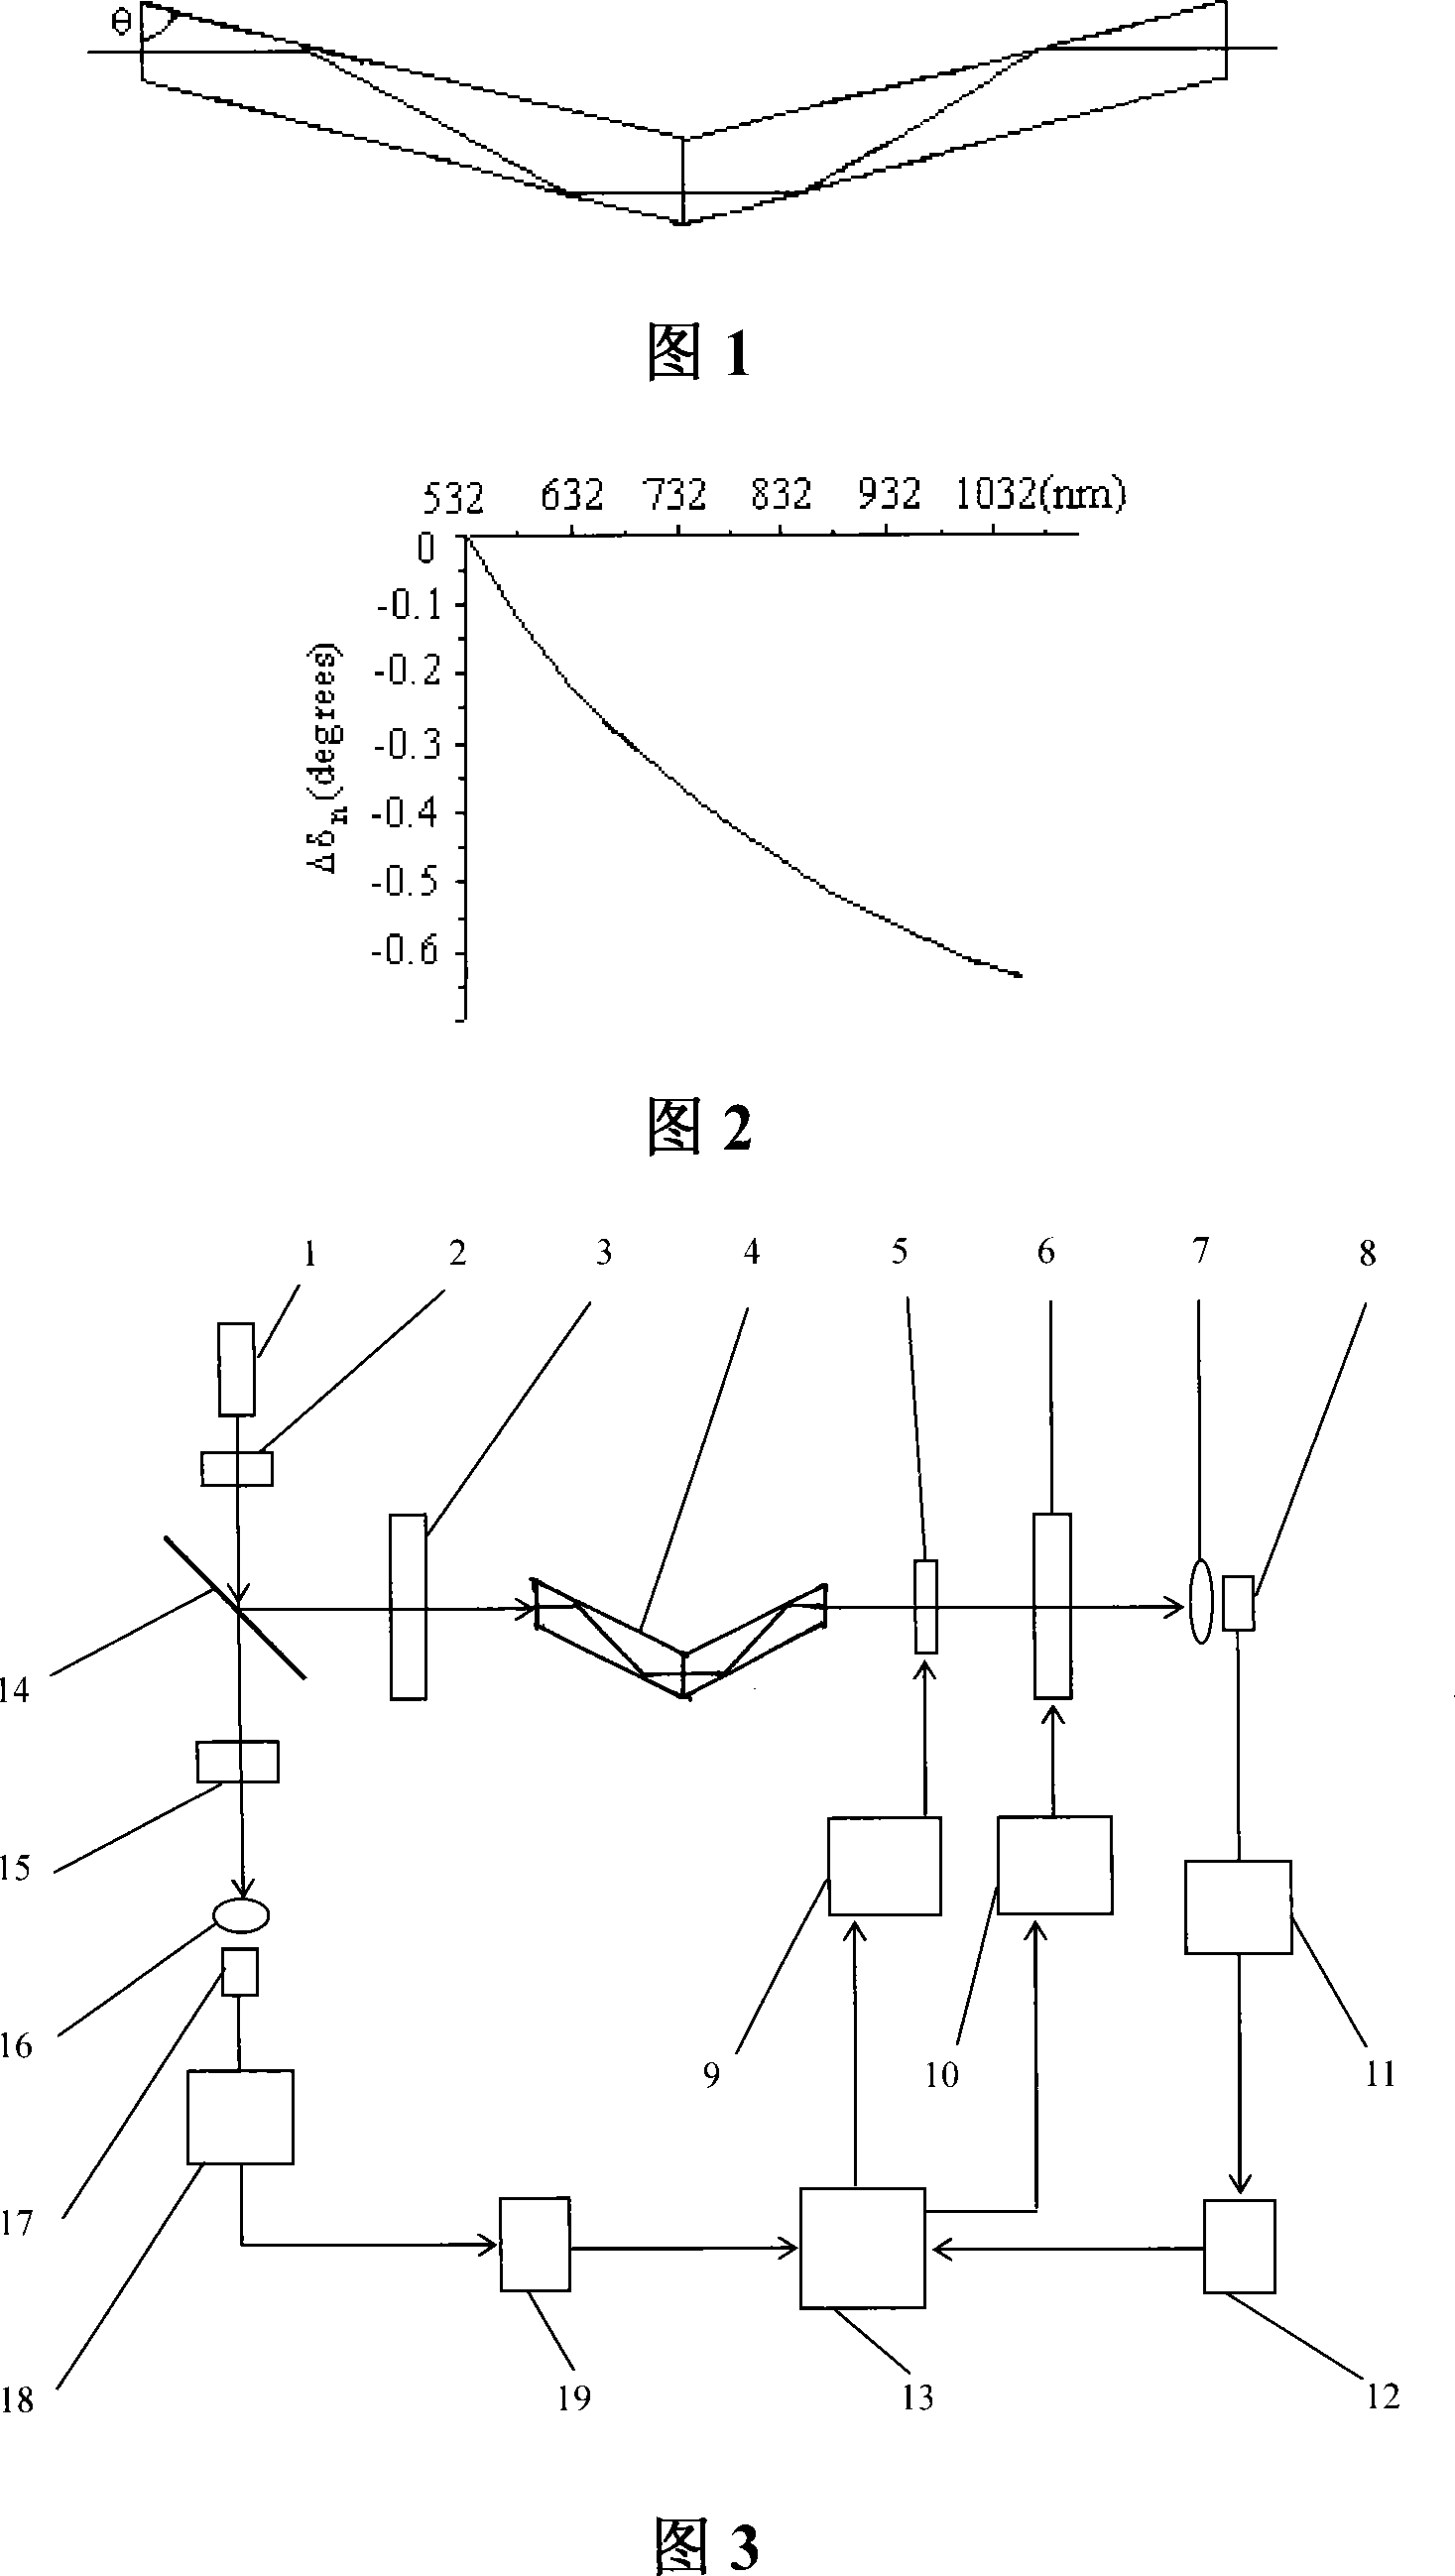 Method and apparatus for measuring 1/4 wave plate phase delay and quick shaft direction